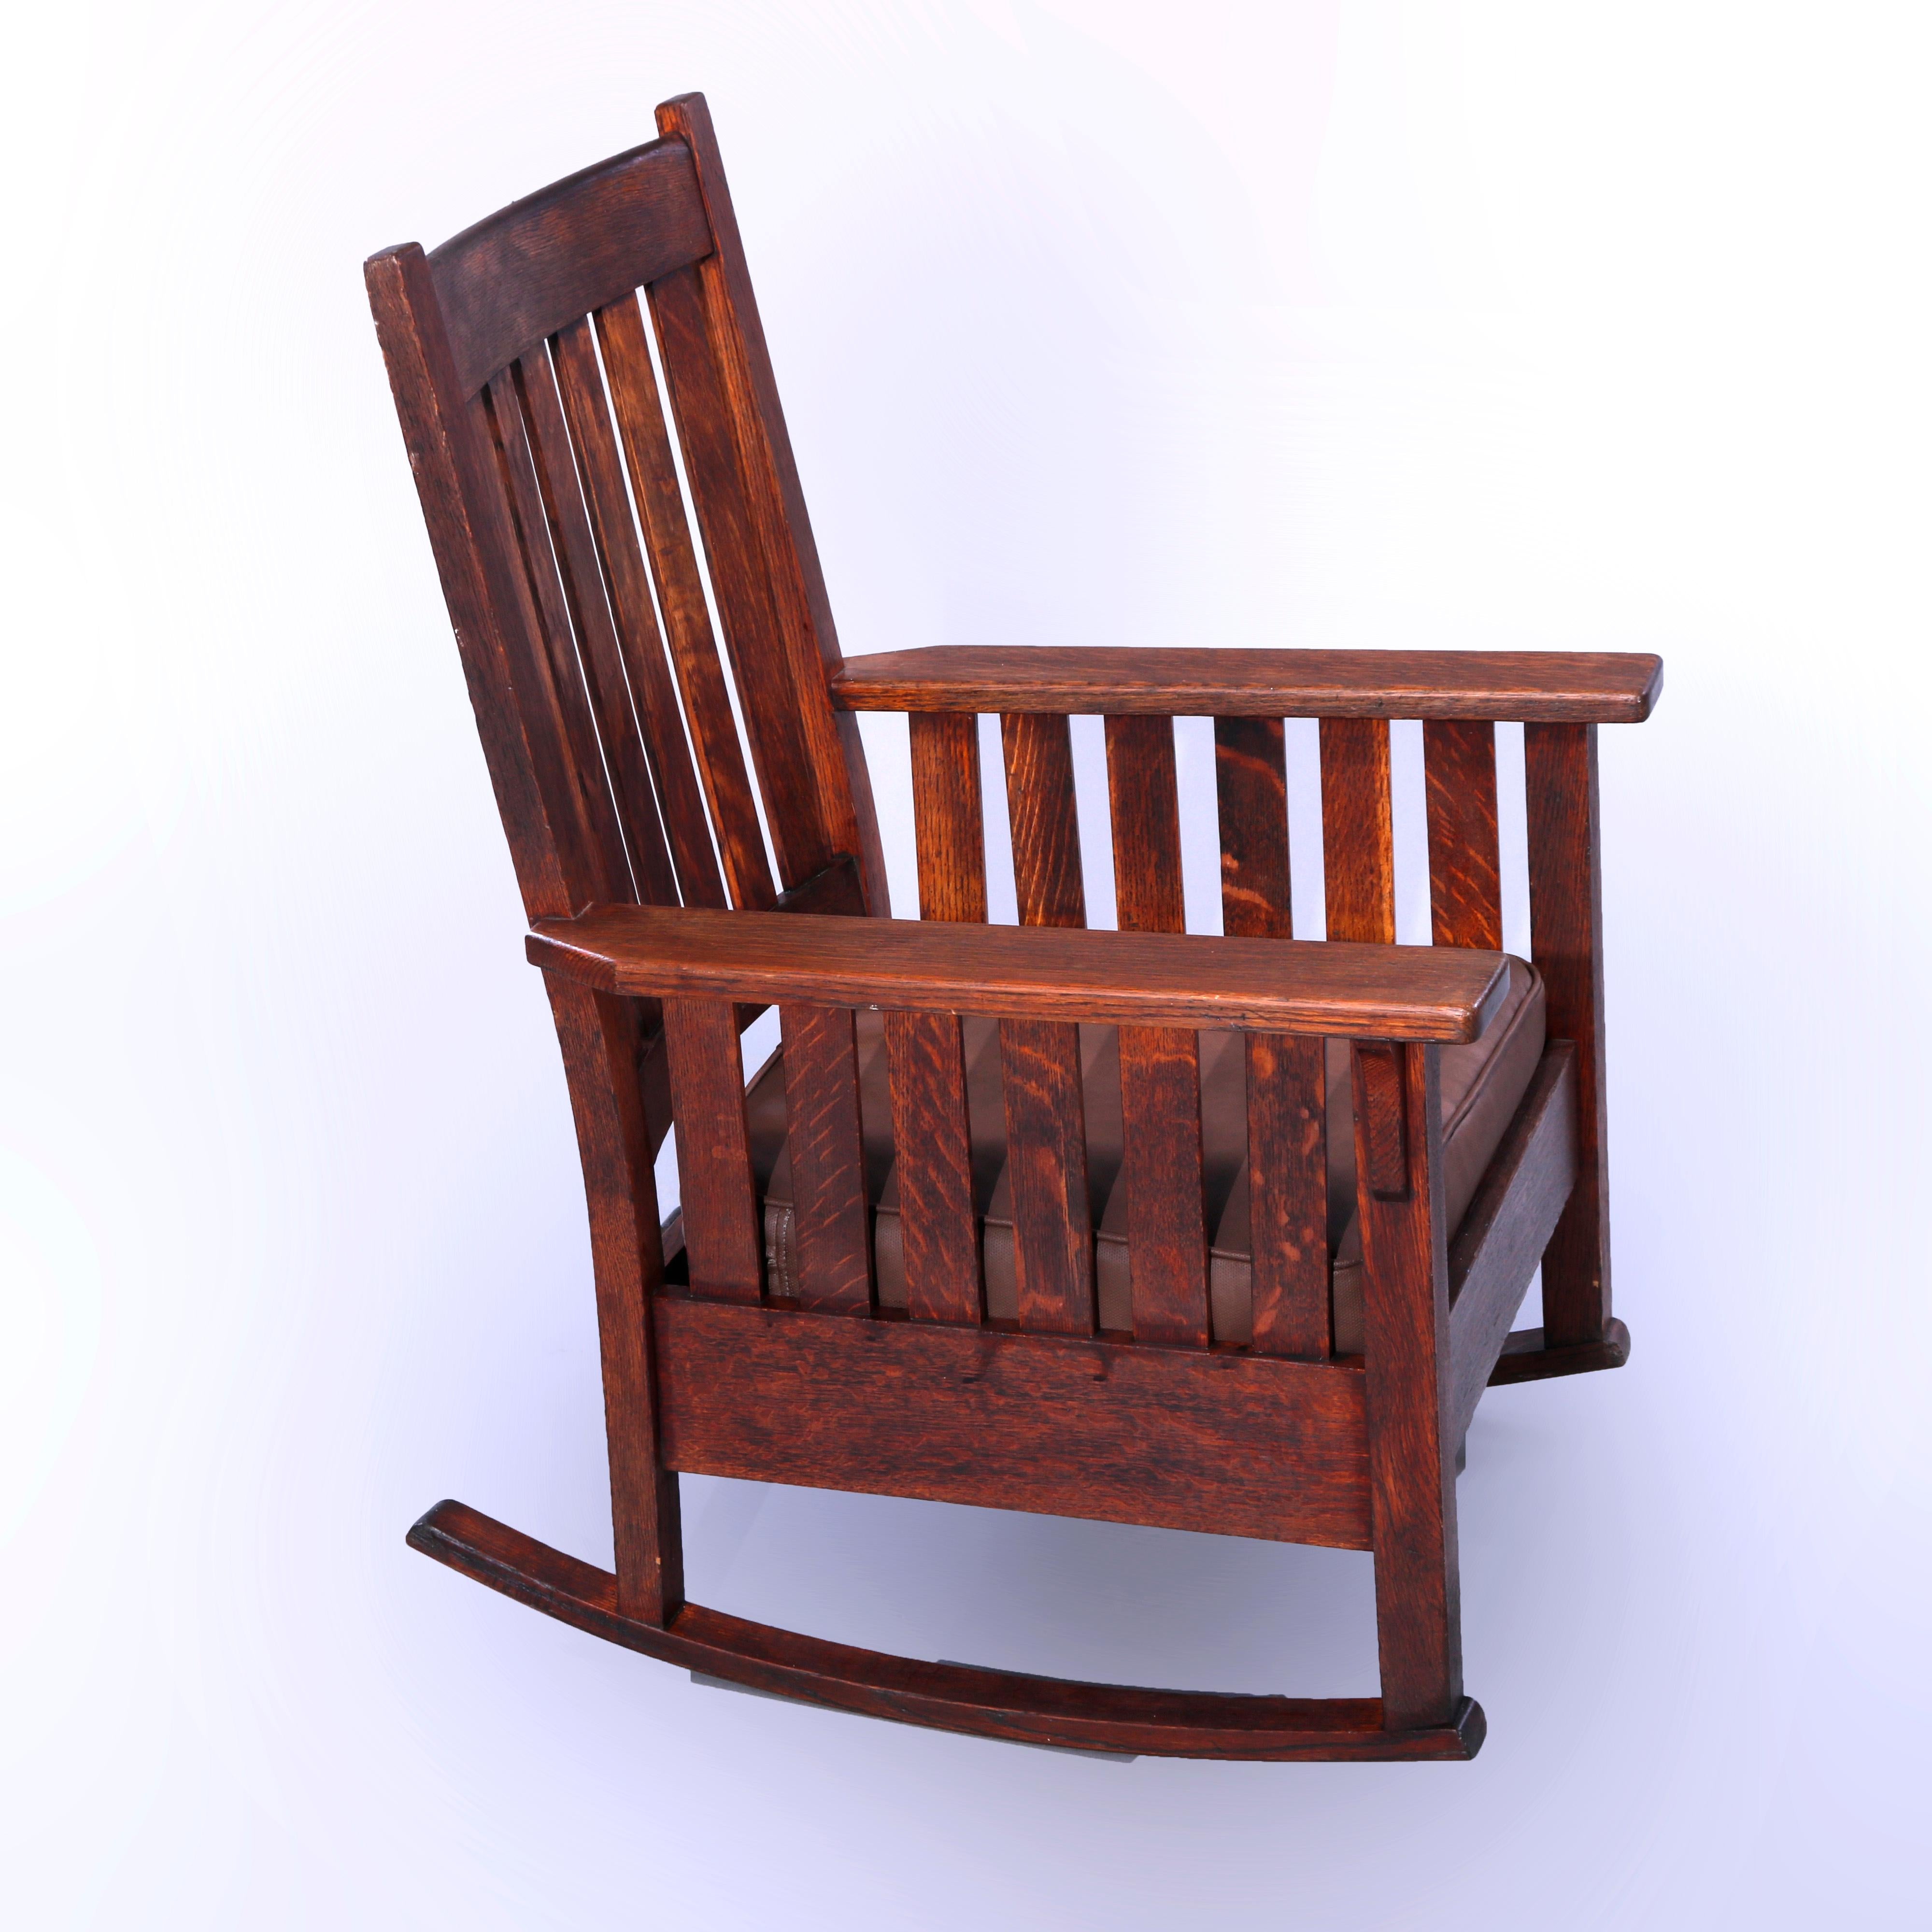 An antique Arts and Crafts Mission rocking chair by Stickley Brothers offers quarter sawn oak construction with slat back and sides, circa 1910

Measures - 38.25'' H x 27.25'' W x 28'' D.